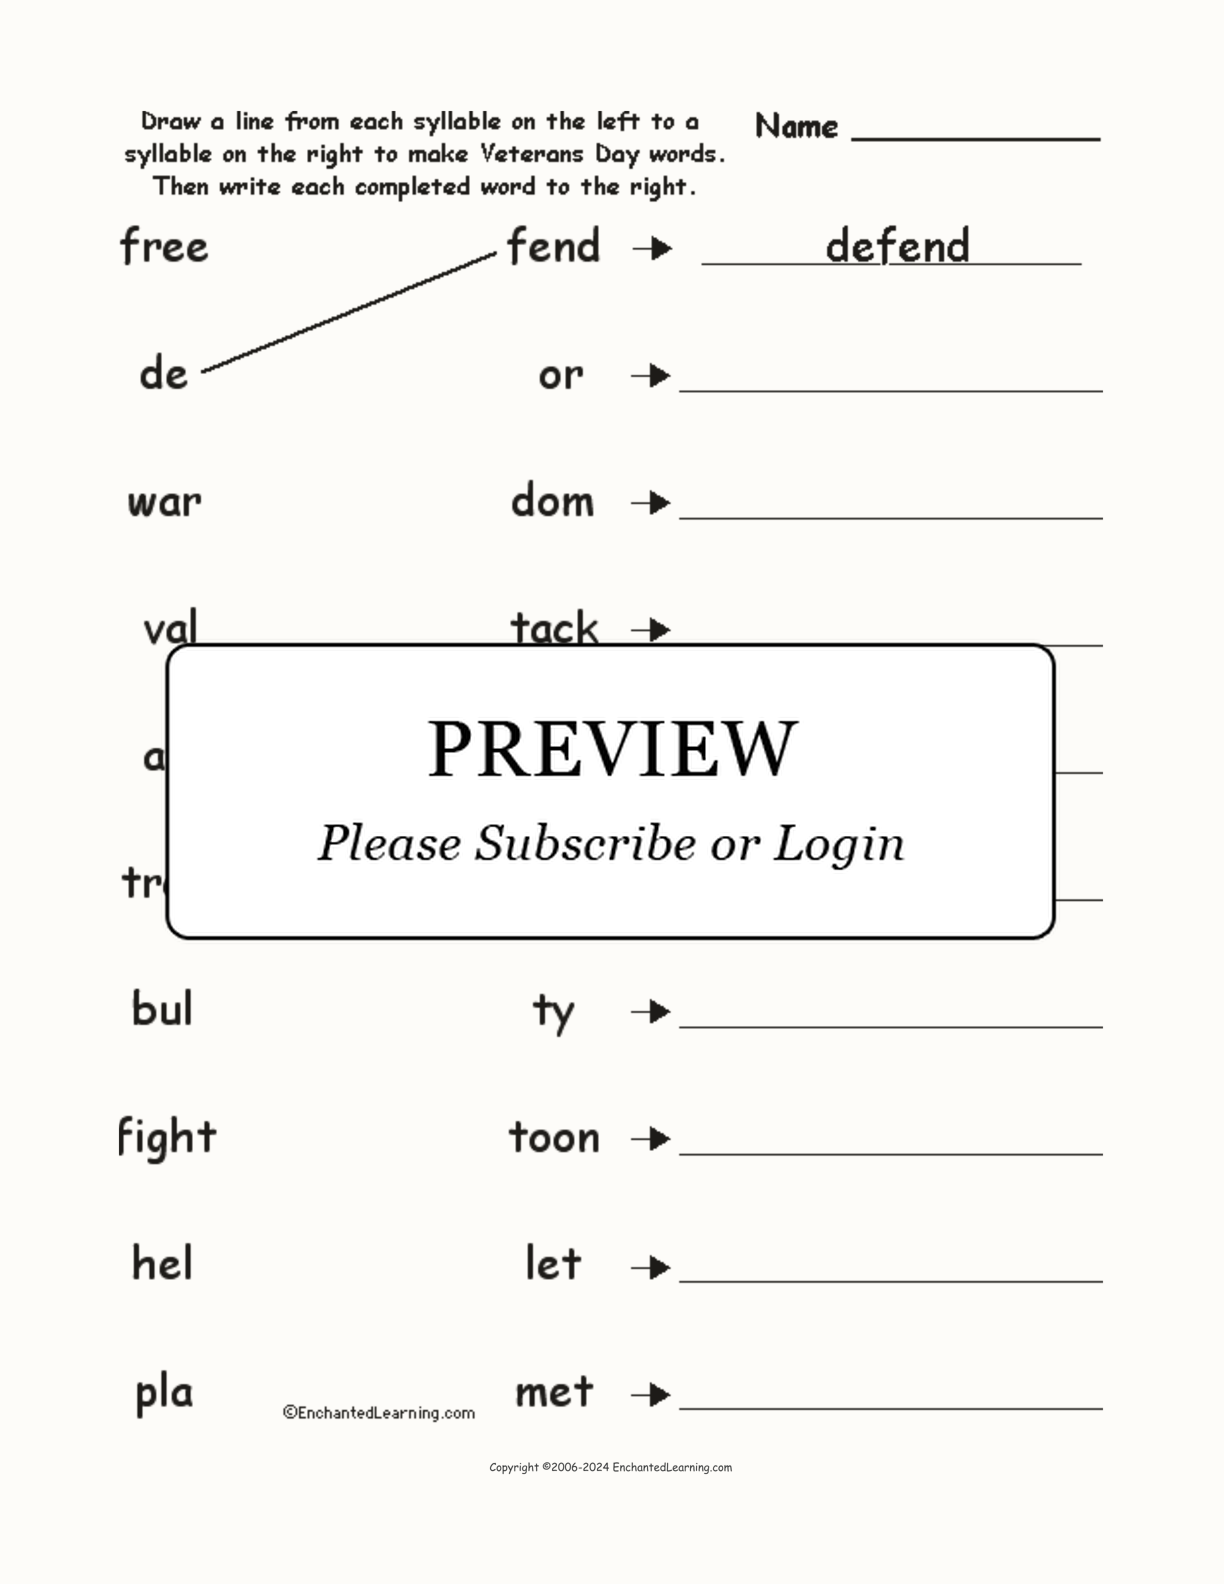 Match the Syllables: Veterans Day Words #2 interactive worksheet page 1